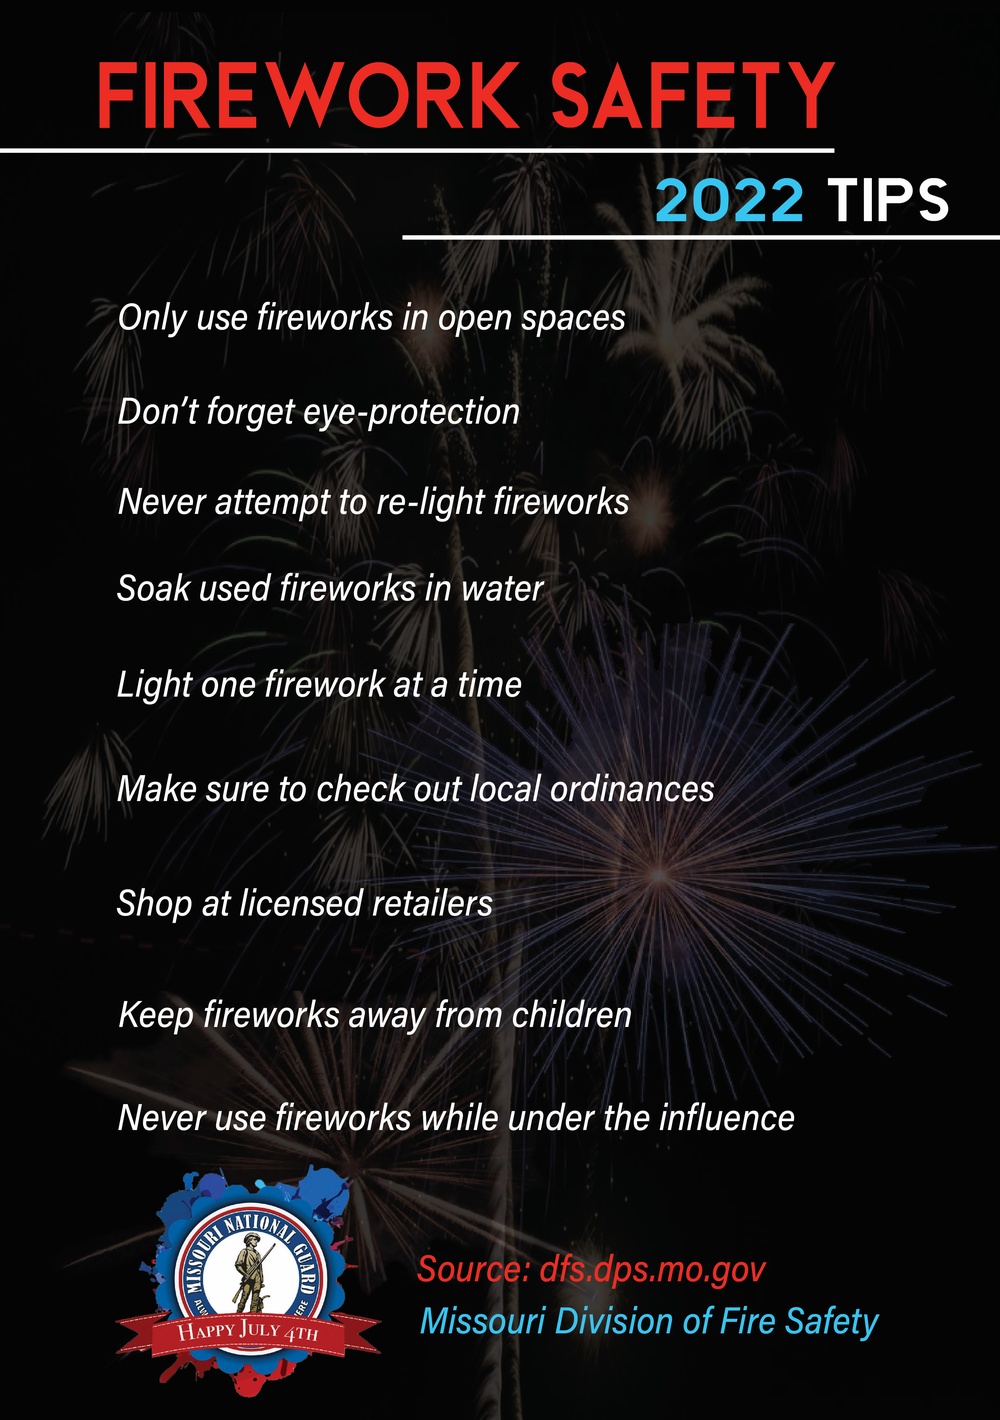 Firework Safety on Independence Day